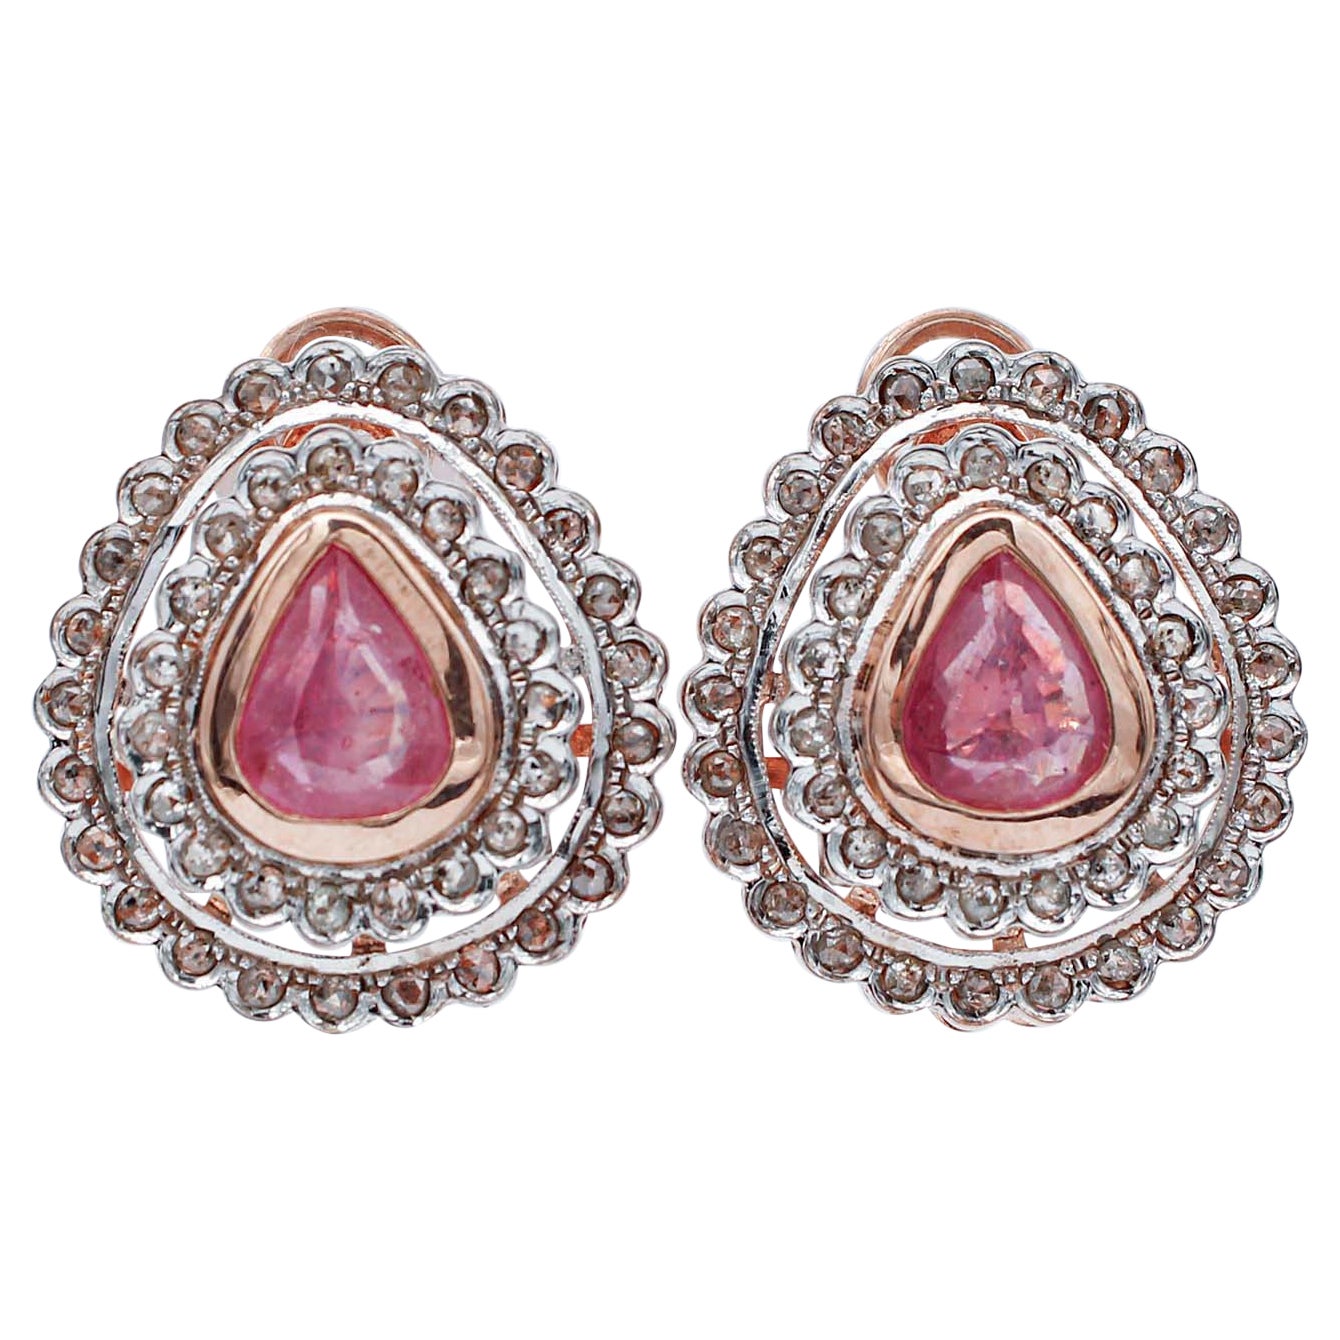 Rubies, Diamonds, Rose Gold and Silver Retrò Earrings For Sale